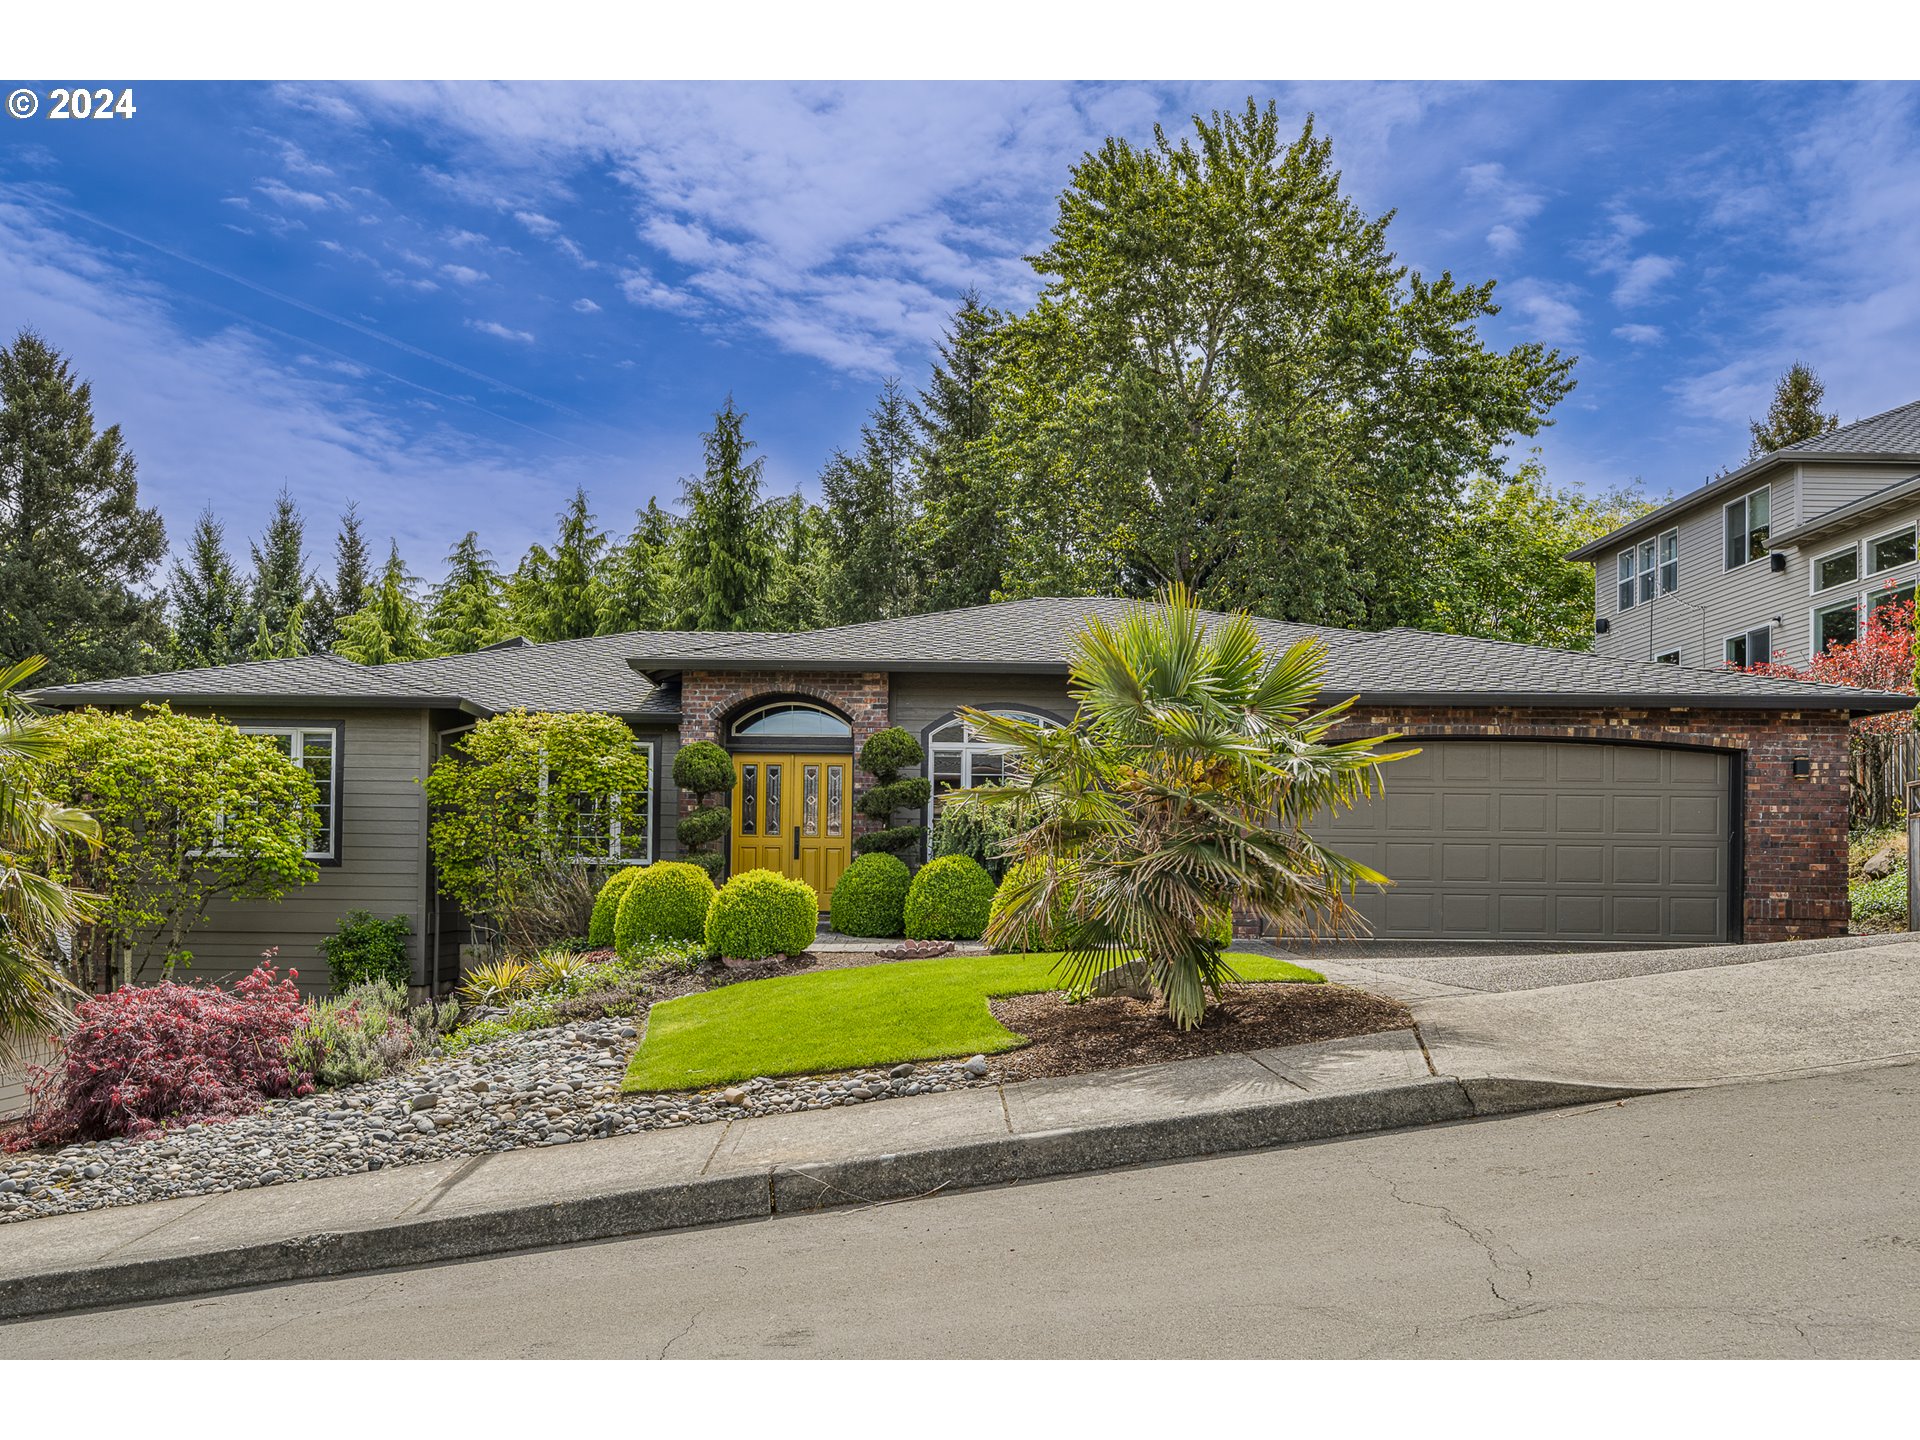 View main image for listing located at: 13796 SW Hillshire Dr